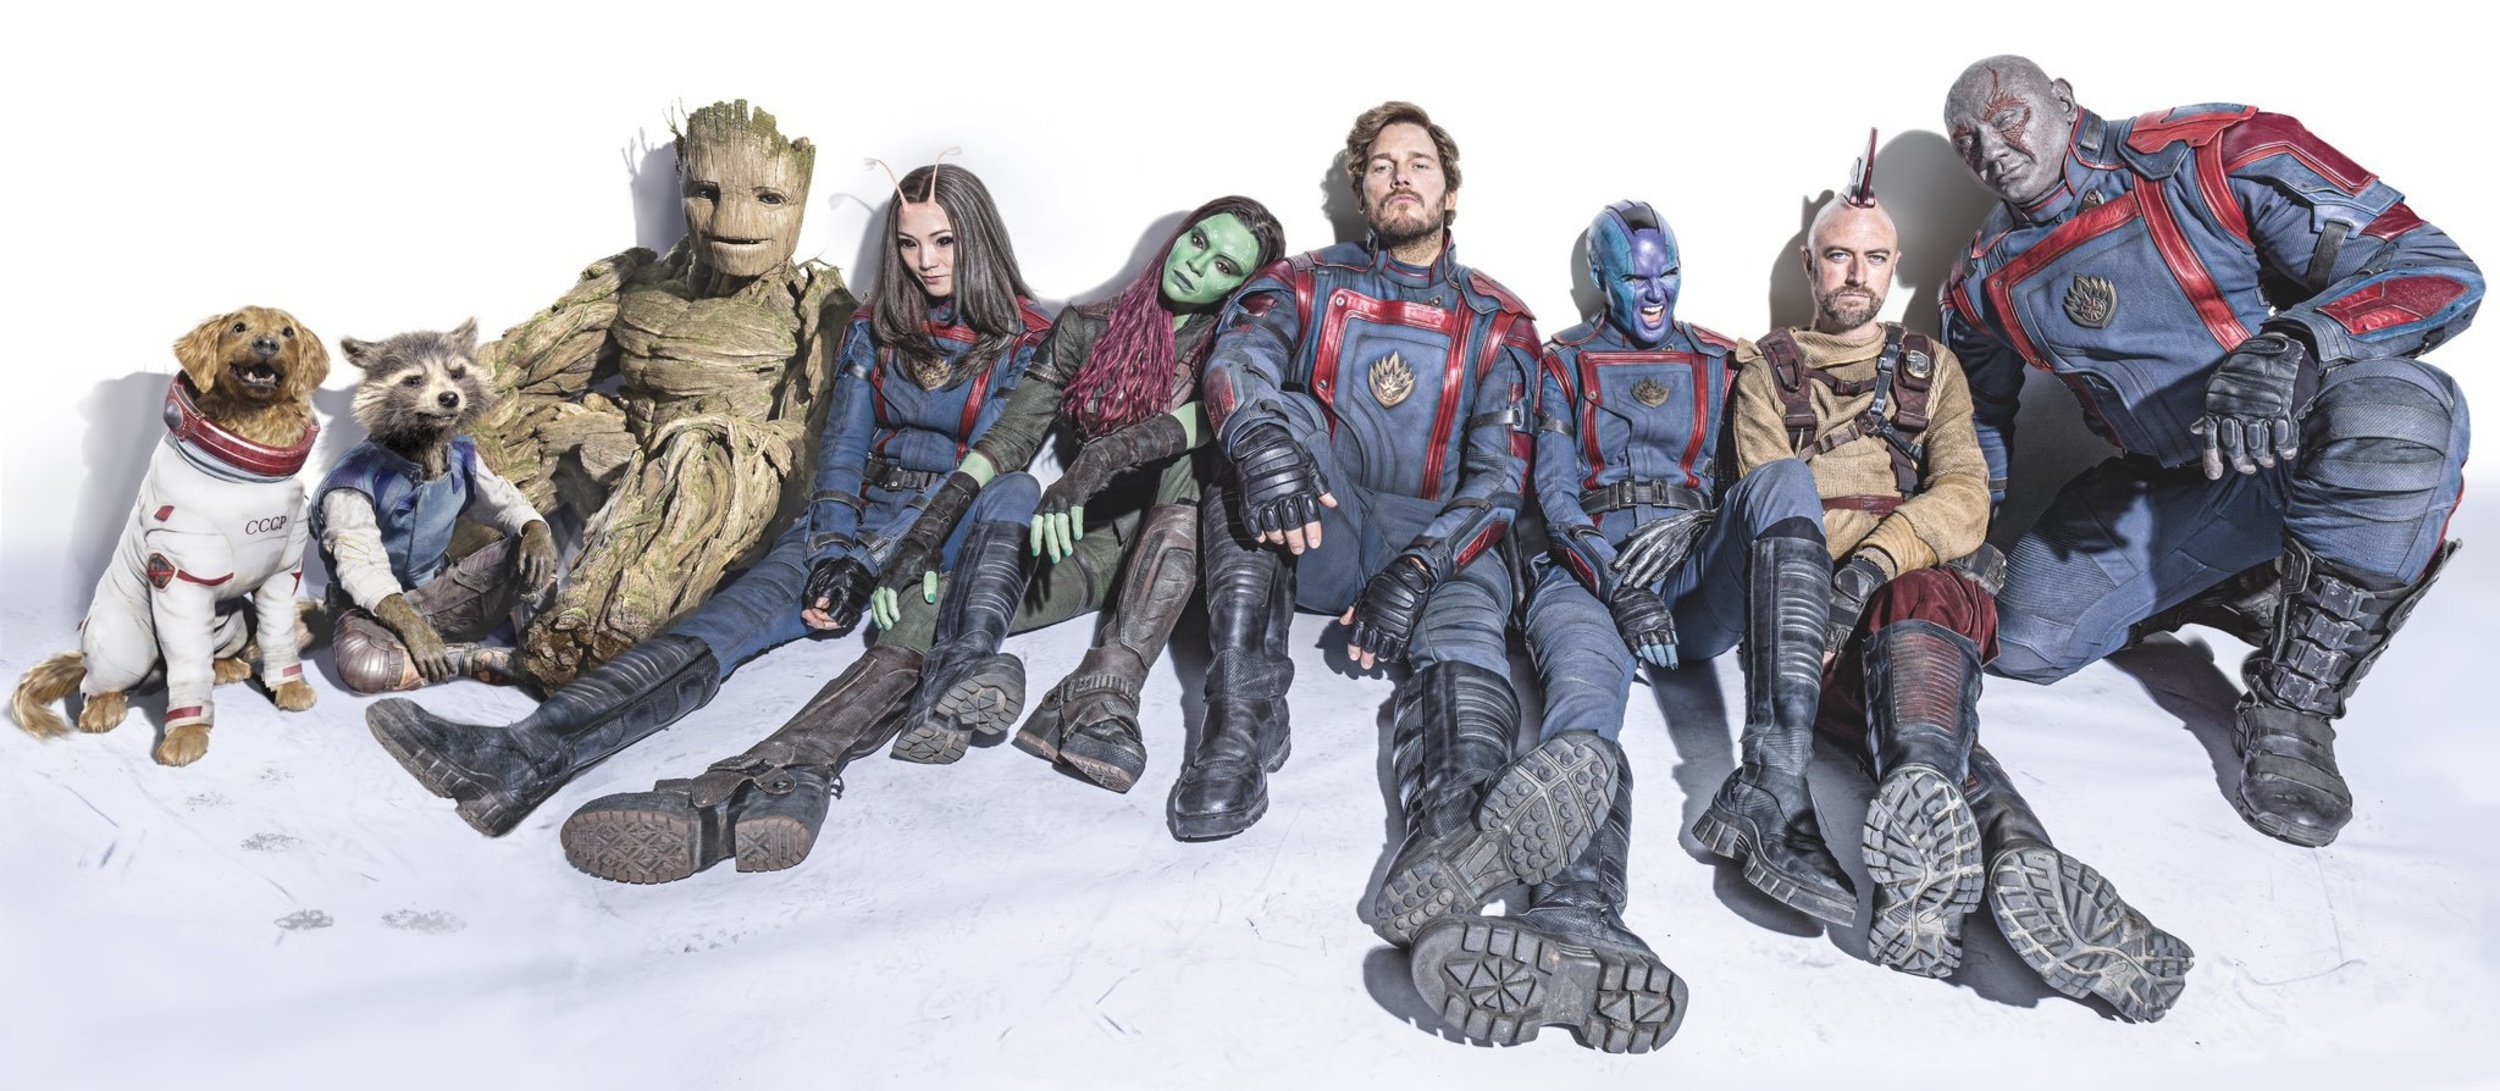 <p>Critically, and commercially, the MCU had dipped from the peak of “Avengers: Endgame” and “Spider-Man: No Way Home.” “Guardians of the Galaxy Vol. 3” was able to get things back on track. It made $118.4 million domestically in its first weekend, beating the projection of $110 million by a bit. Notably, though, it made $62 million in its second weekend to top the box office again. The 48-percent decline was the best second-weekend hold of any MCU sequel. It was also the best of the Marvel films in the last couple of years by a sizable margin. For example, second best is “Doctor Strange in the Multiverse of Madness,” which dropped 67 percent.</p><p>You may also like: <a href='https://www.yardbarker.com/entertainment/articles/the_20_best_movies_about_divorce/s1__39920731'>The 20 best movies about divorce</a></p>